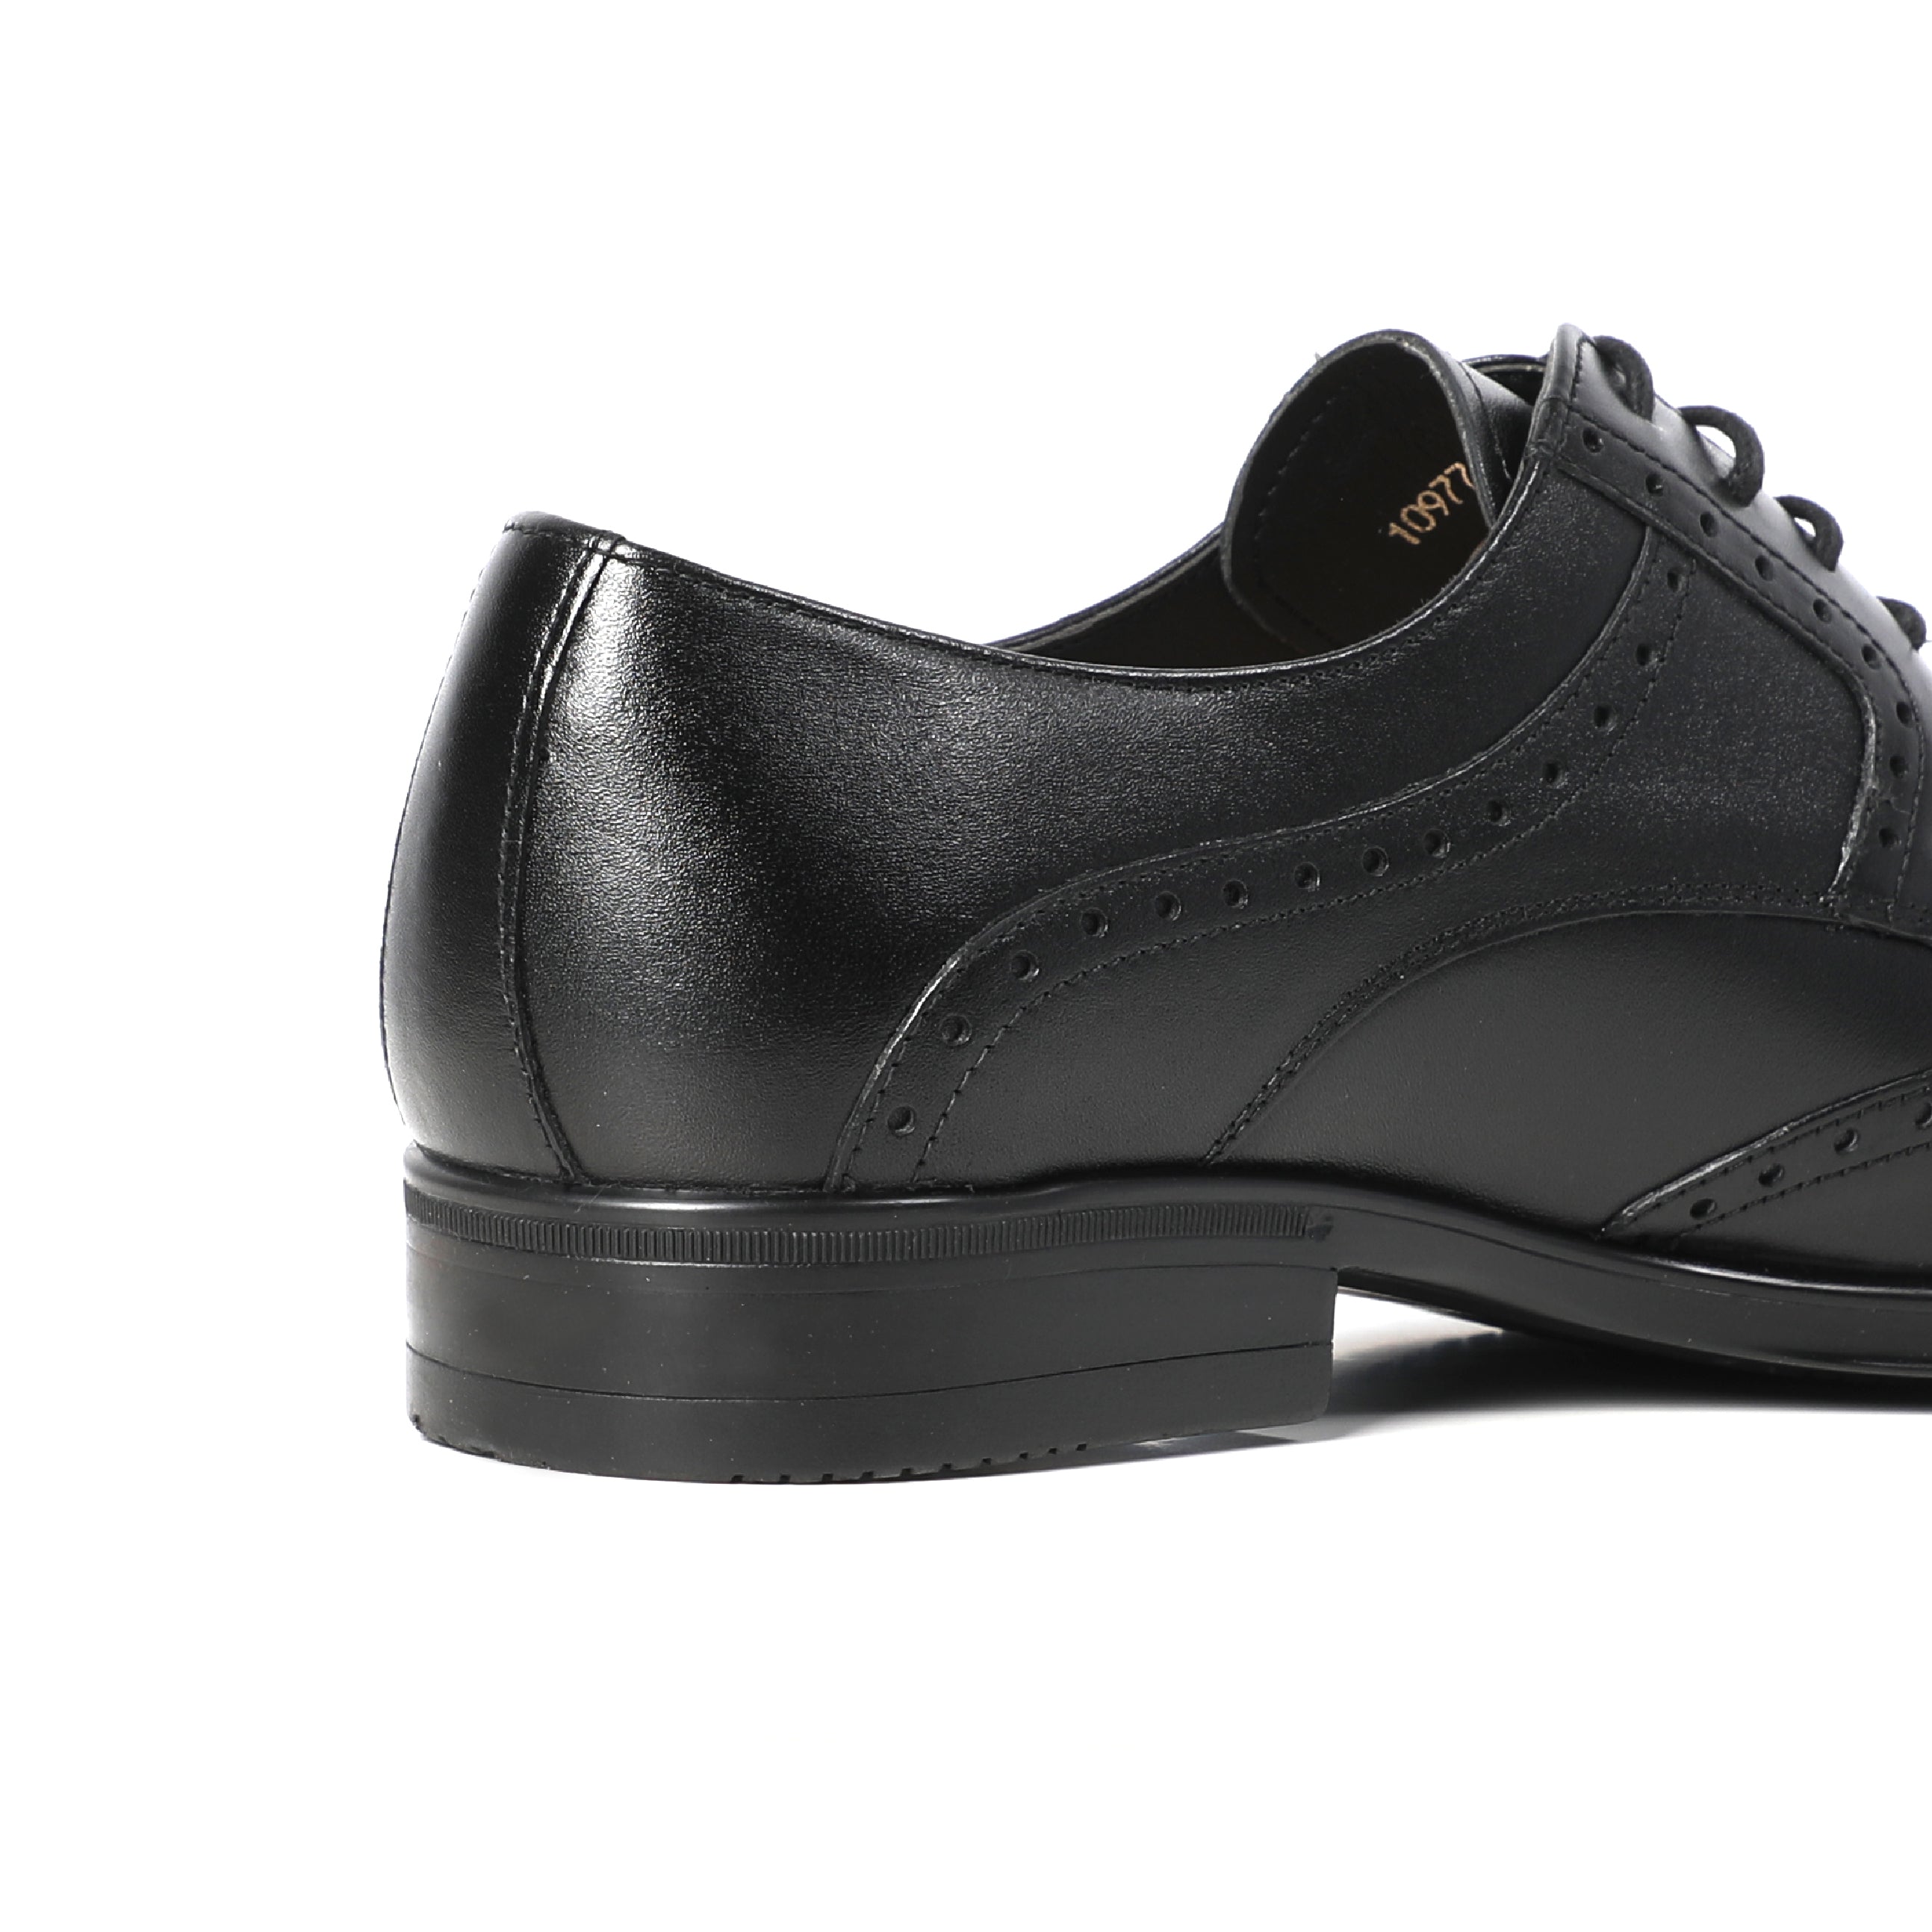 Men Handcrafted Black Classic Shoes